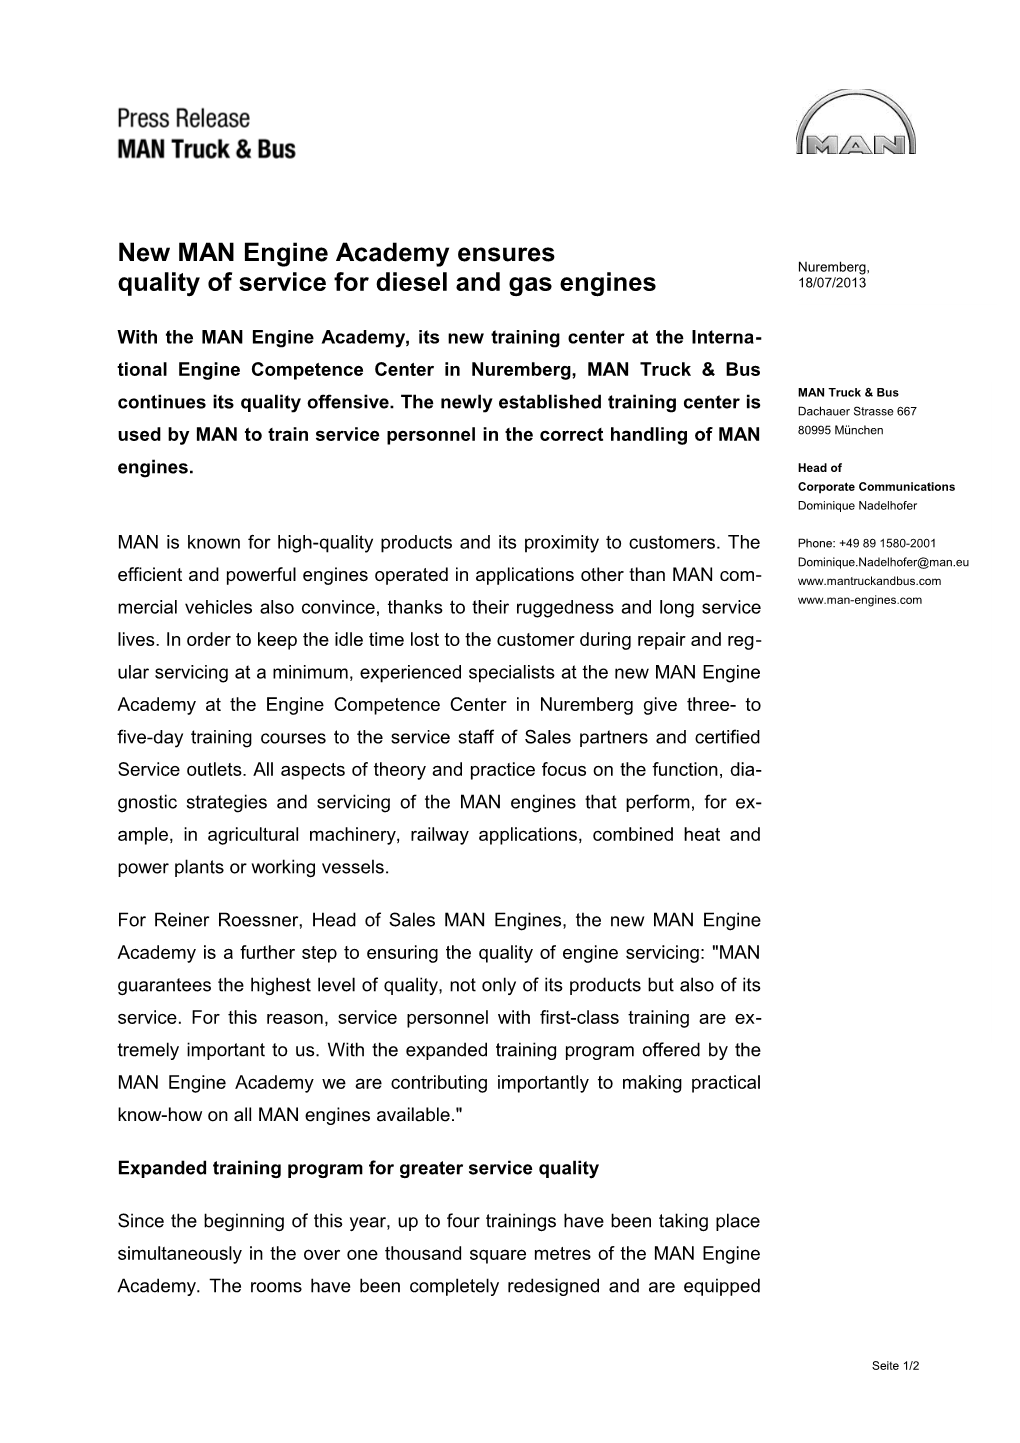 New MAN Engine Academy Ensures Quality of Service for Diesel and Gas Engines